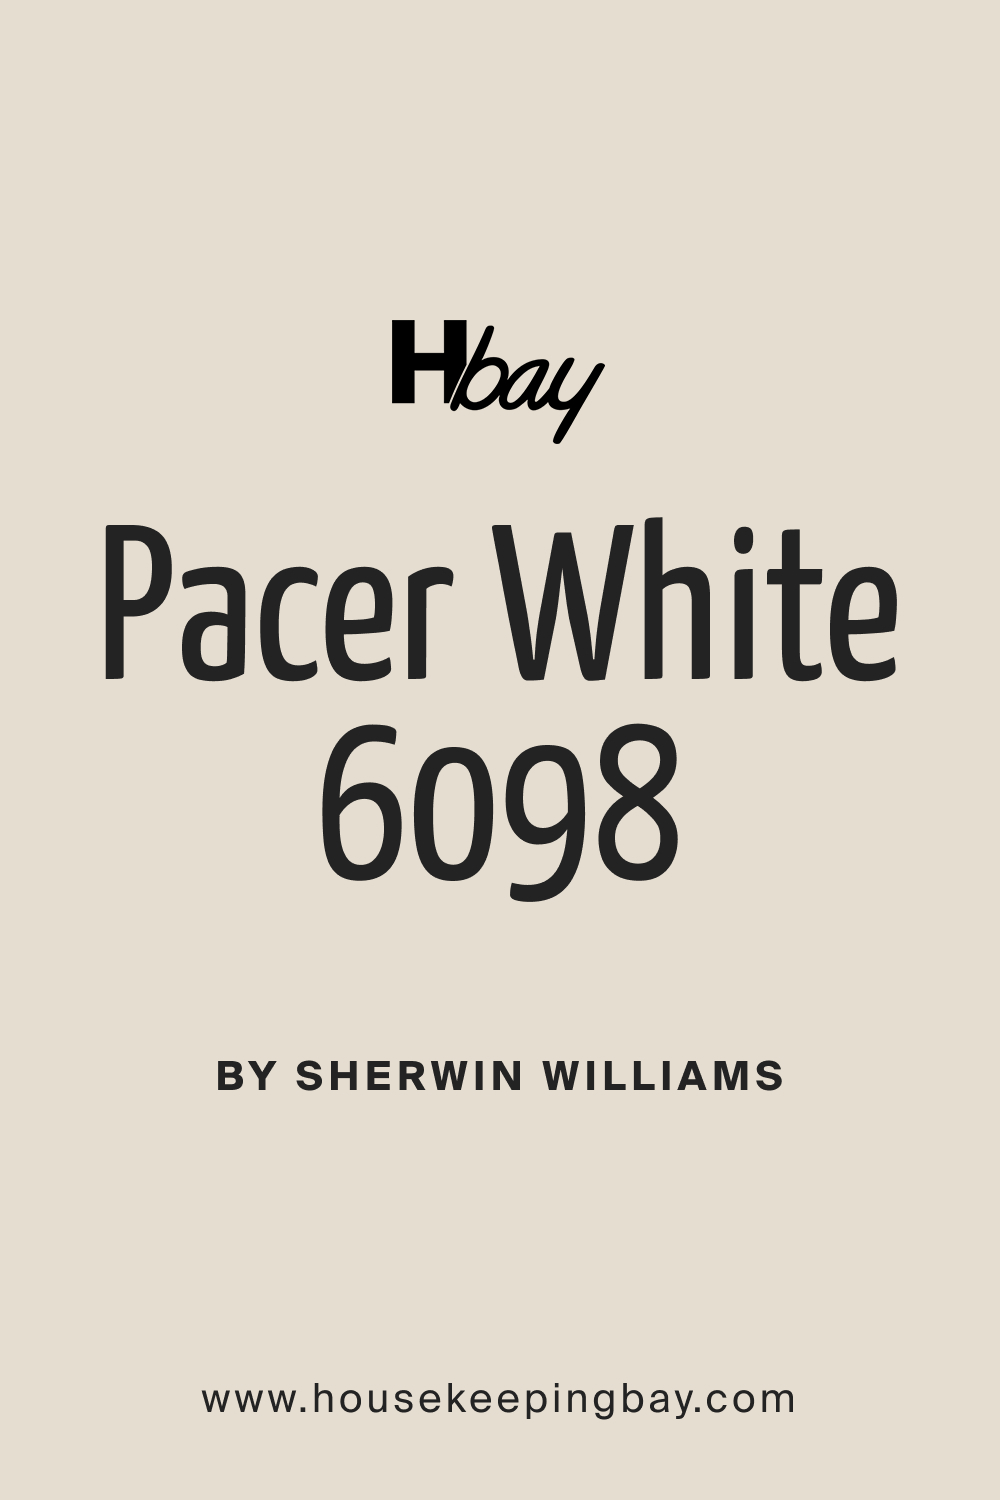 SW 6098 Pacer White Paint Color by Sherwin Williams